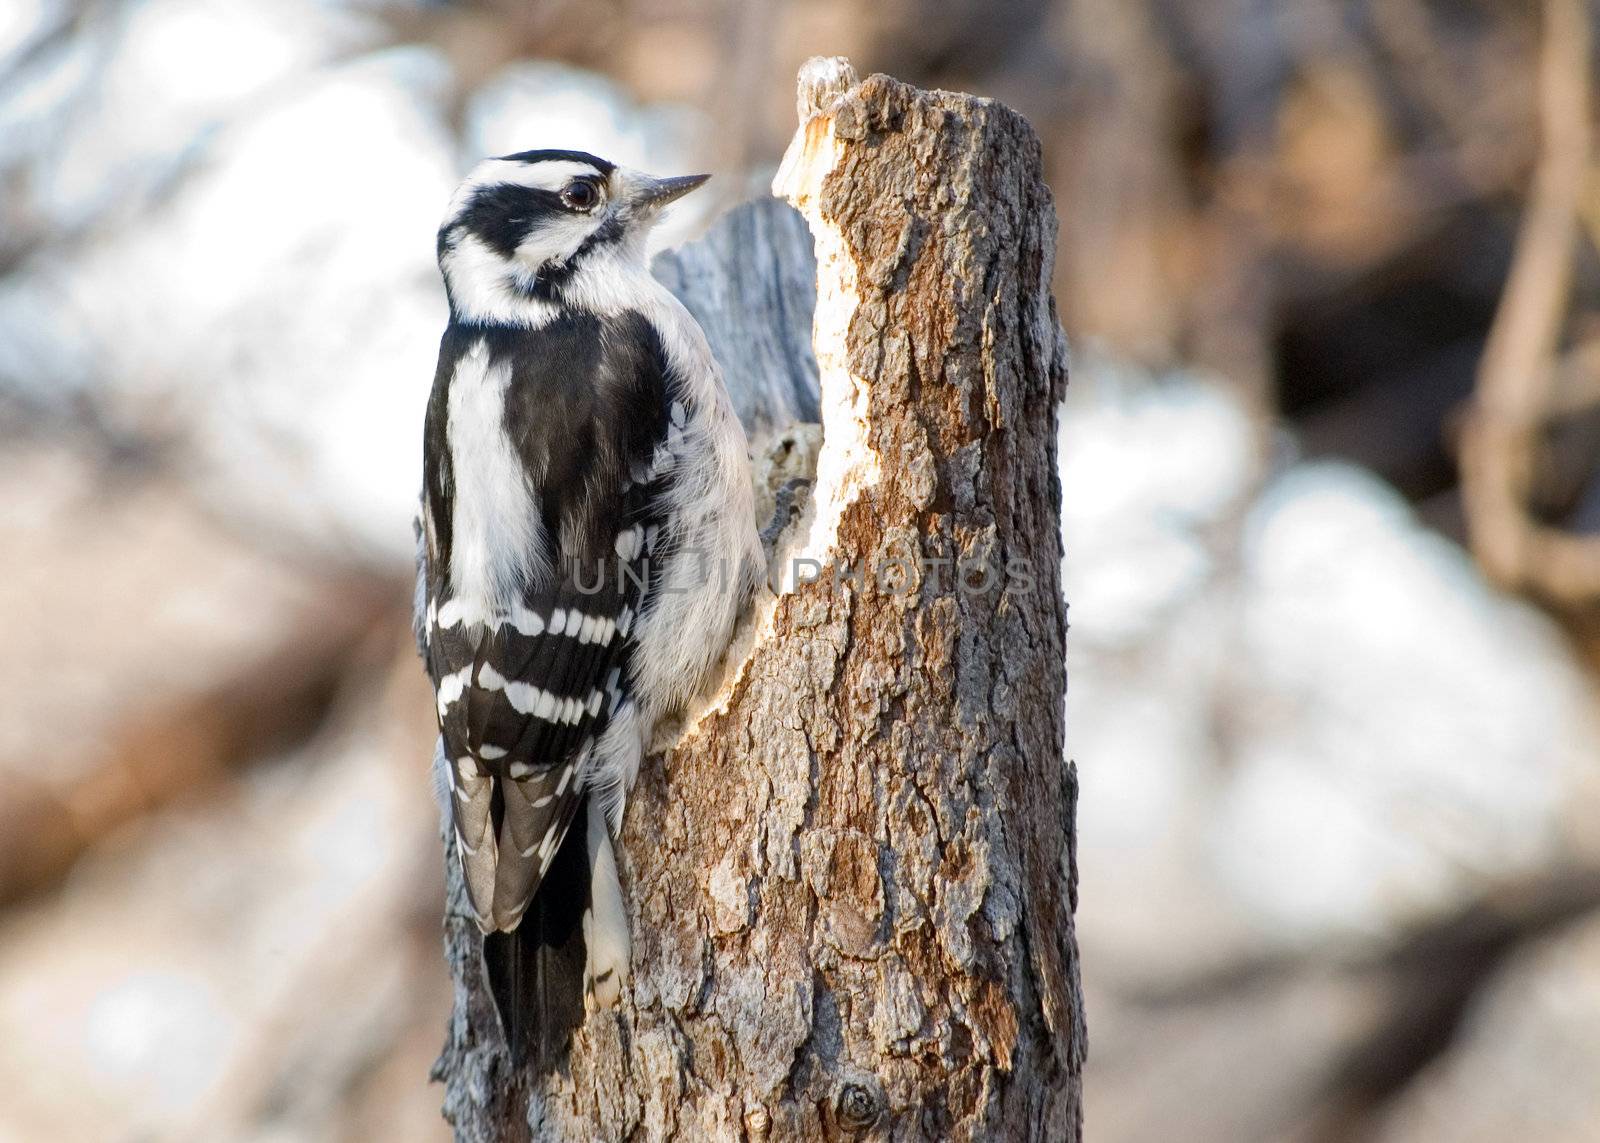 A female downy woodpecker perched on a tree stump.